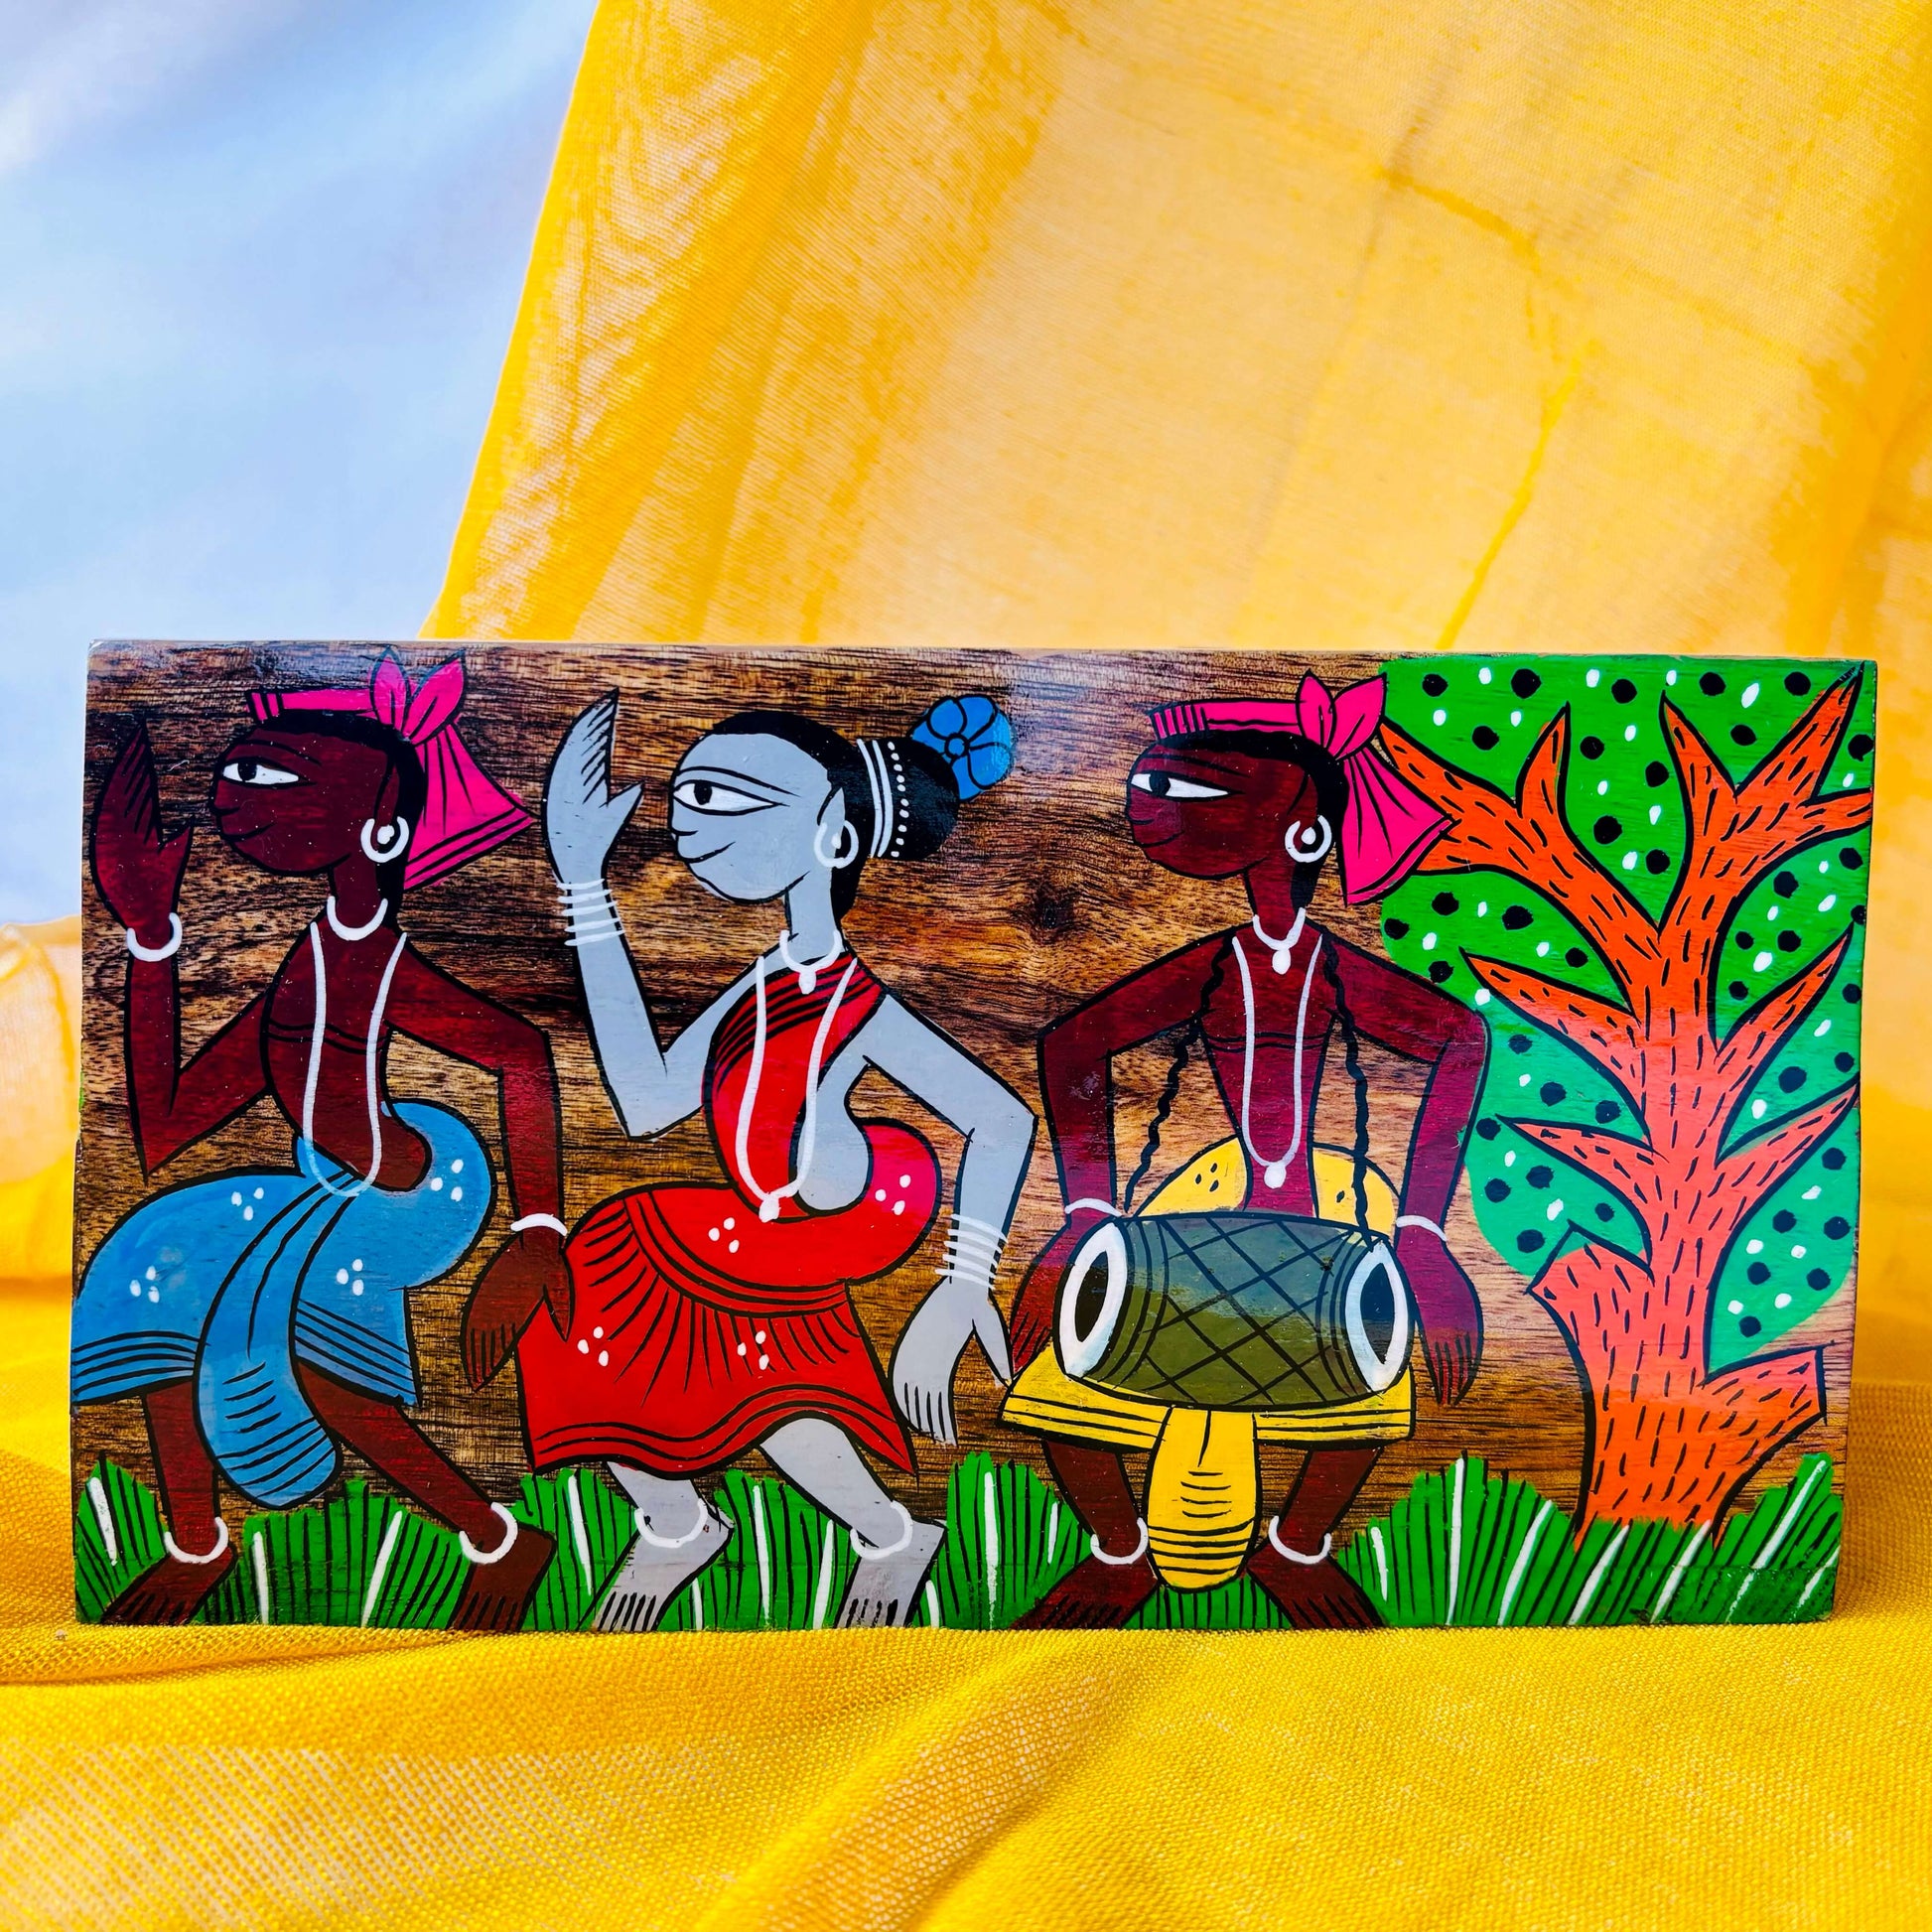 A pure mango wood table organiser or wood cutlery holder in a yellow background, painted with a scene of tribal celebration, where two people are dancing and one is playing a musical instrument surrounded by trees.